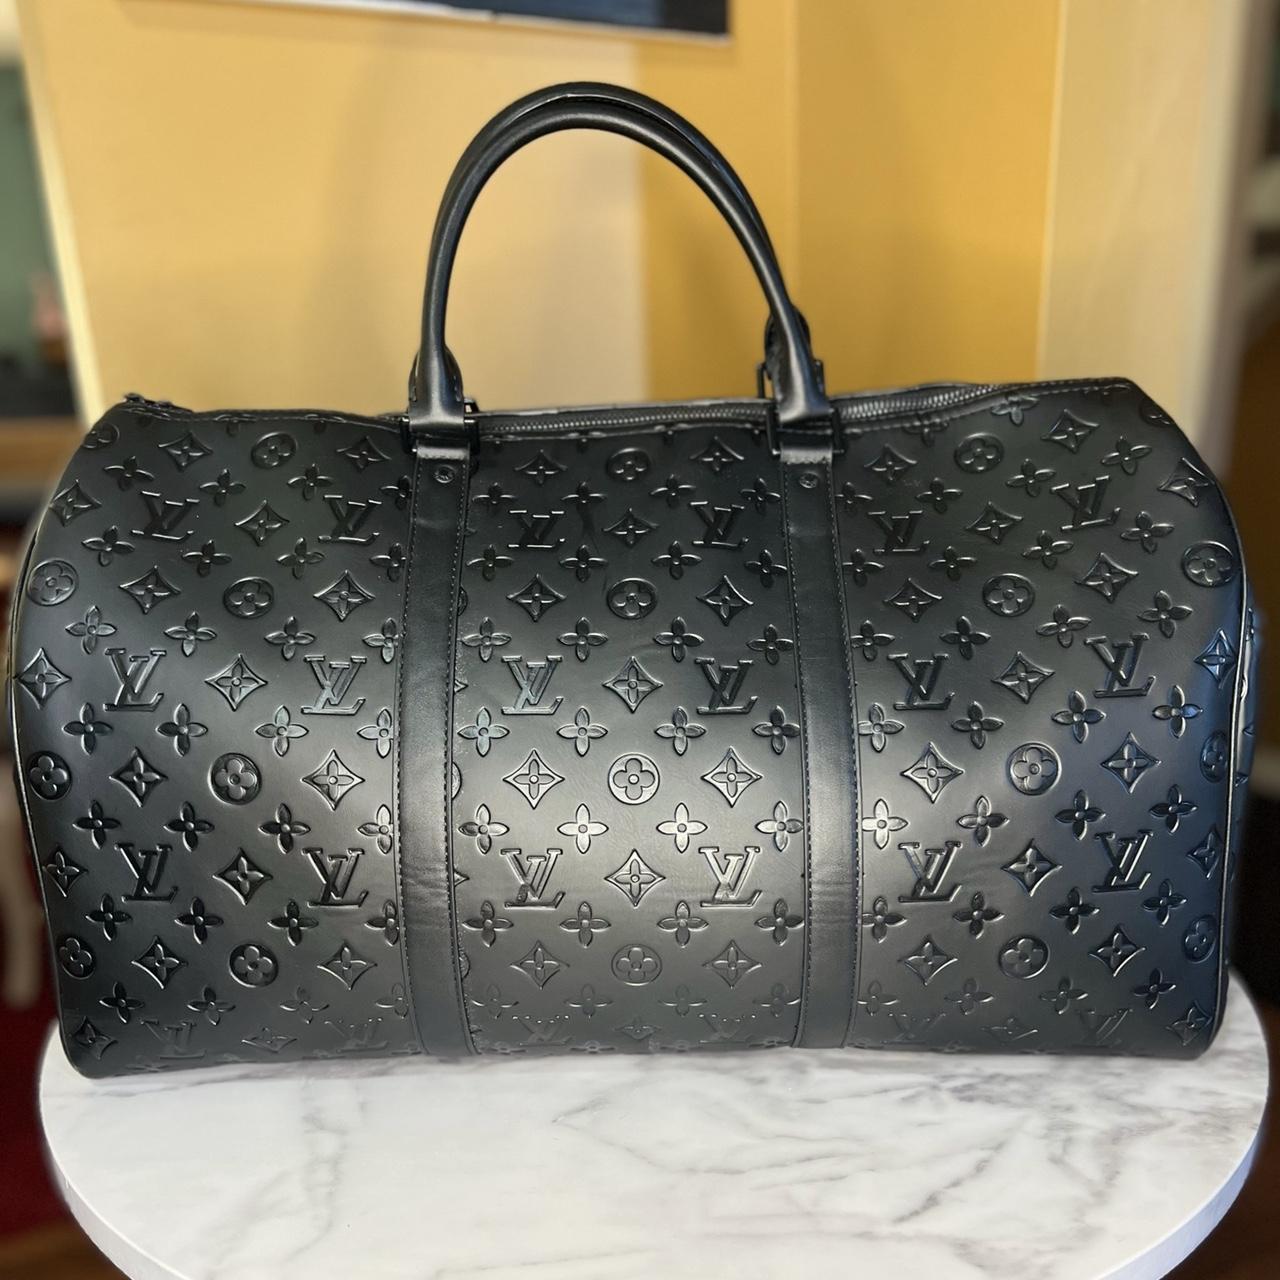 Louis Vuitton Moscow City Guide French - Depop